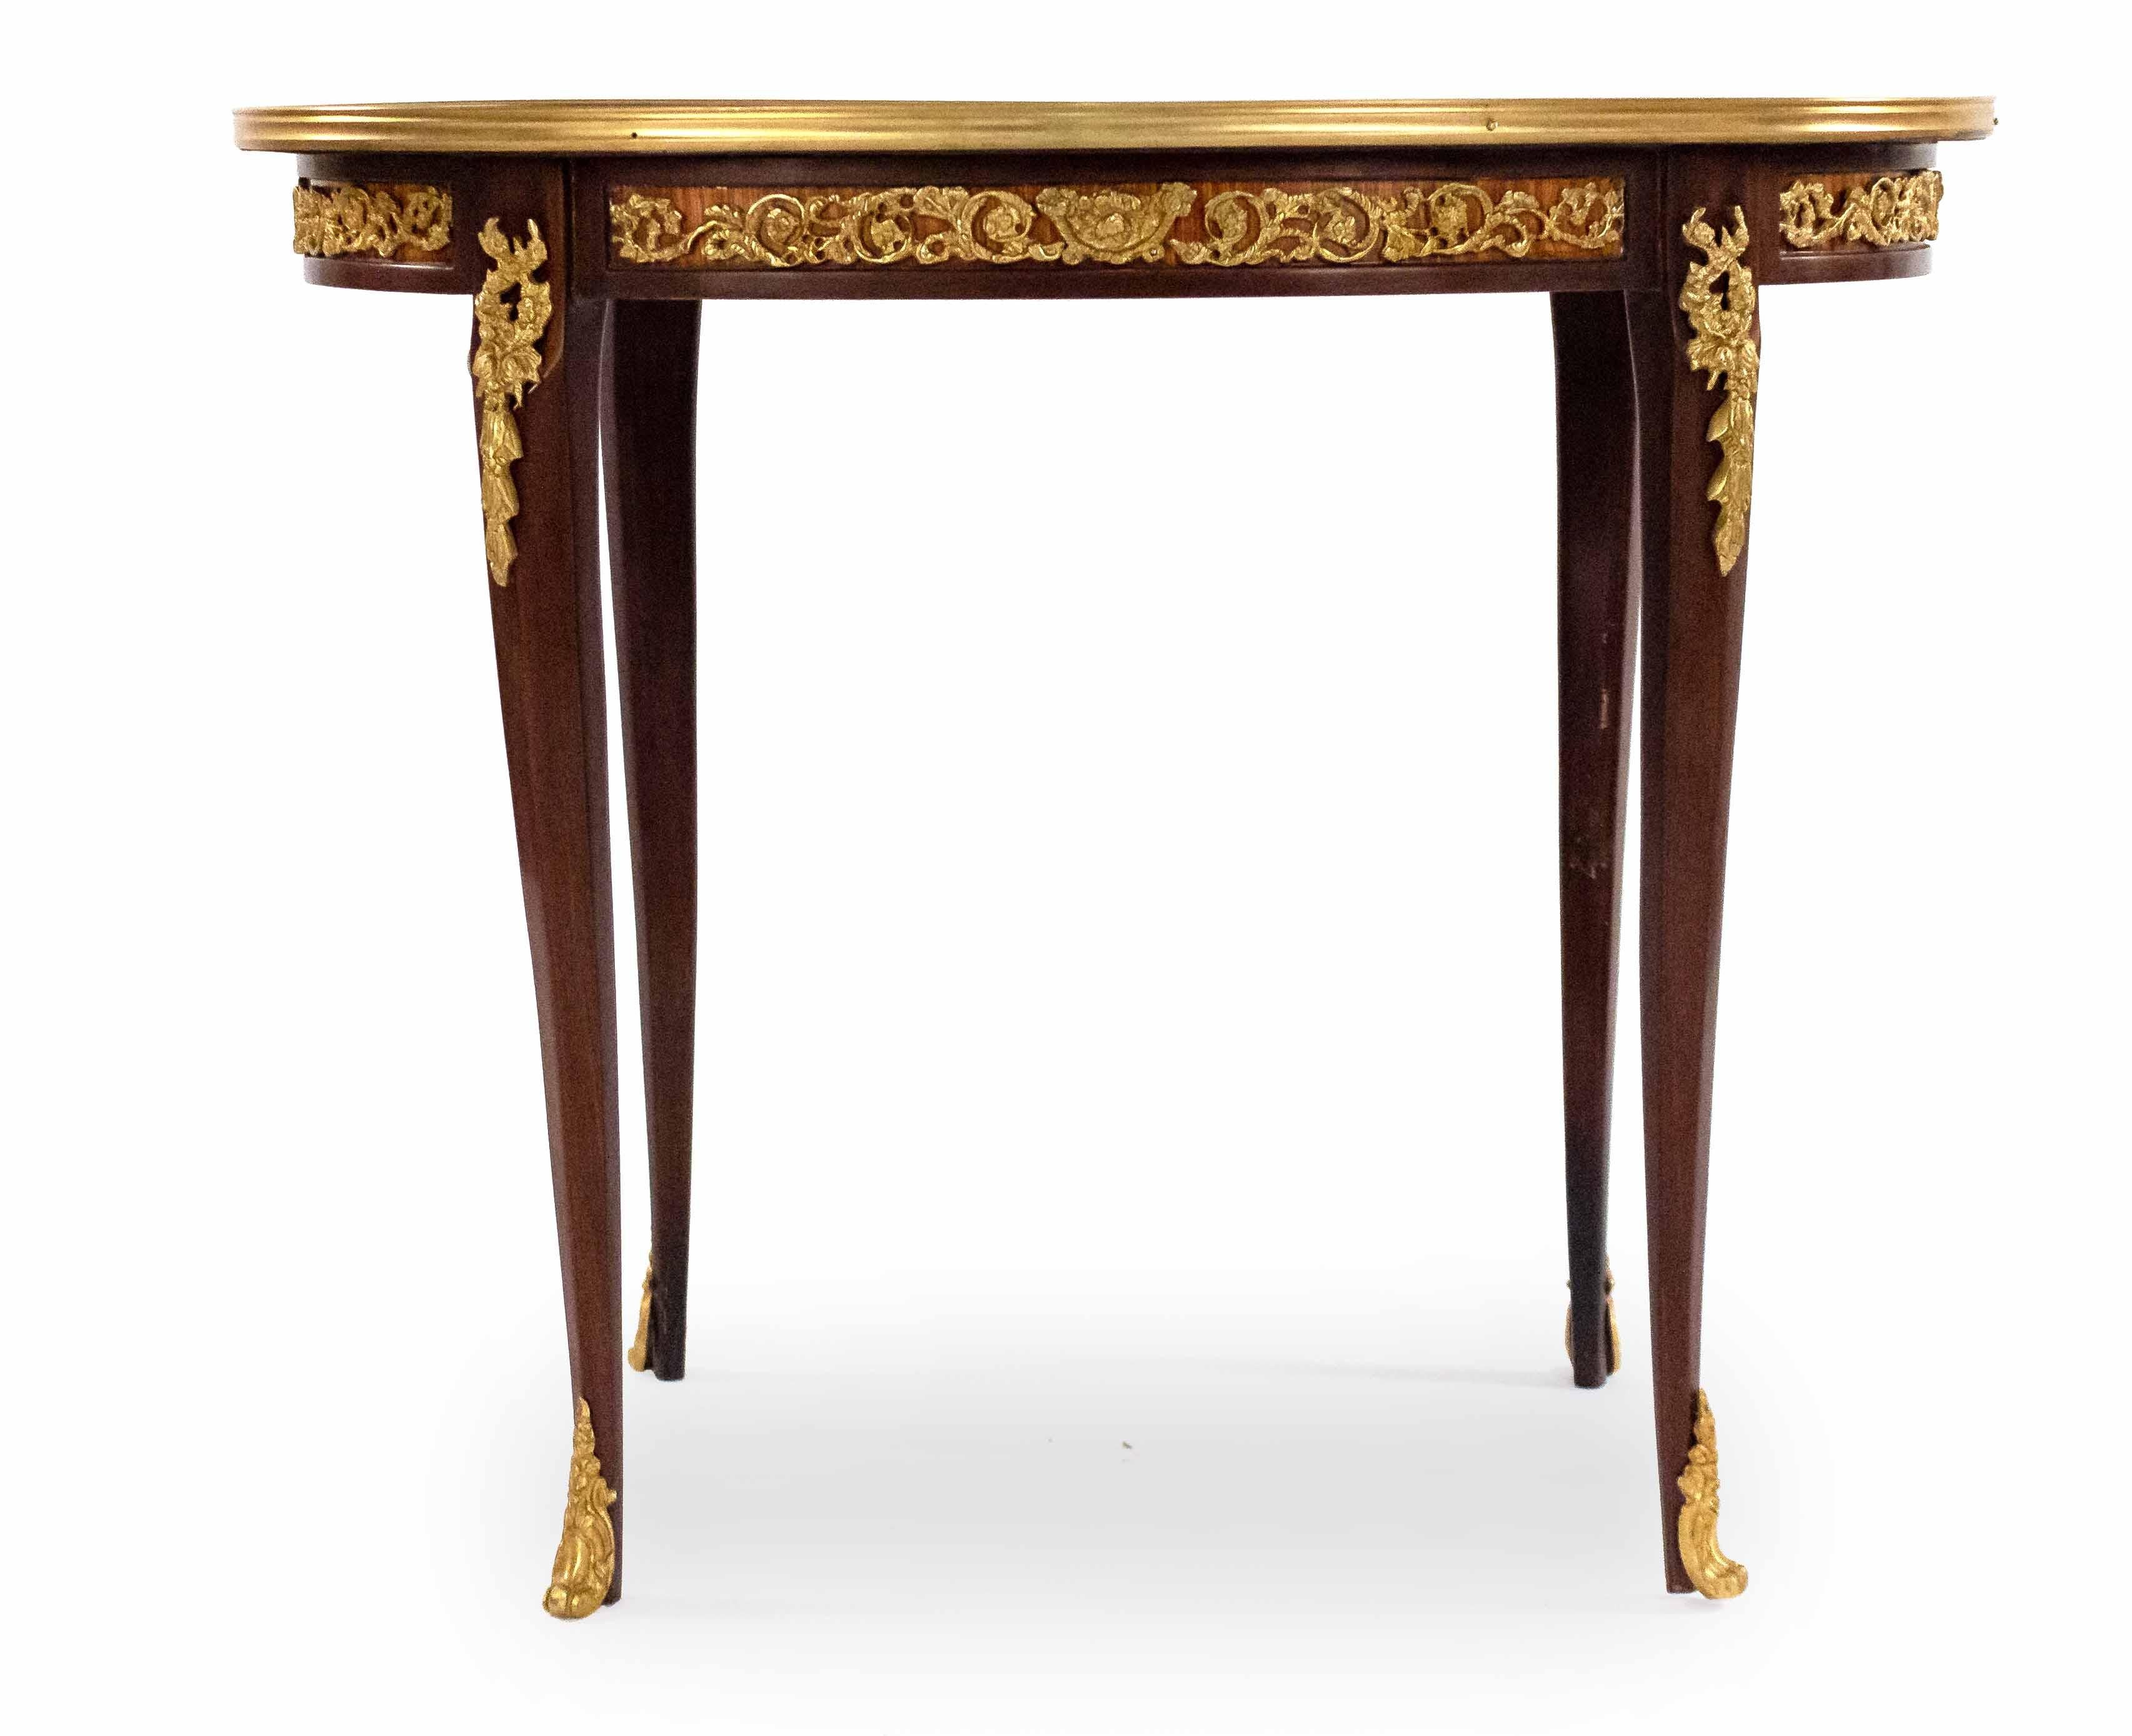 Pair of Louis XV style (20th century) oval side or end tables with basket weave marquetry veneer tops and gilt bronze trim with tapered legs having bronze sabots.